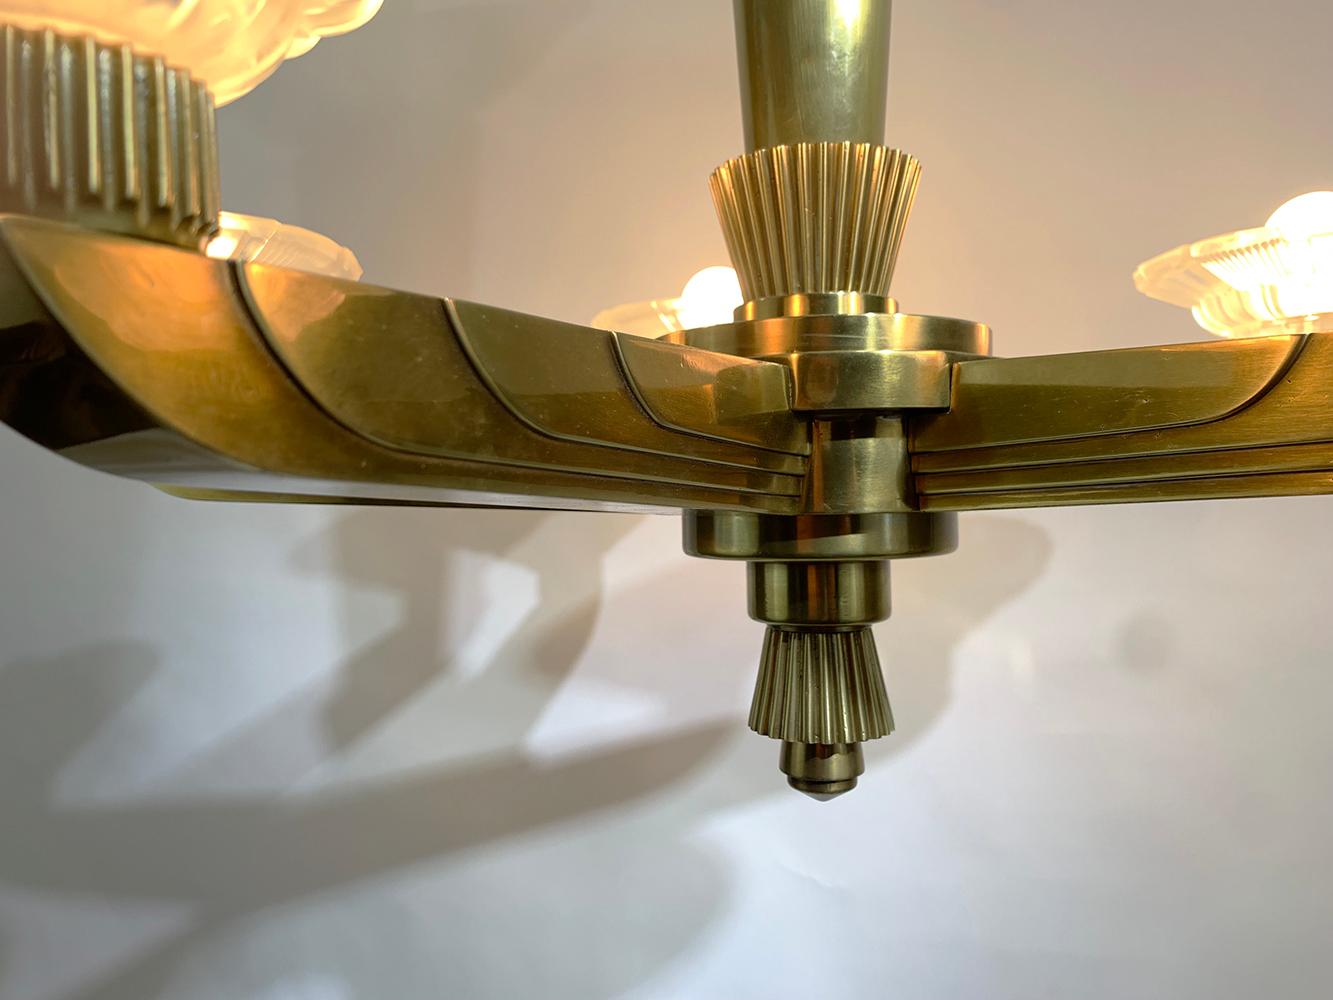 Exceptional Hettier & Vincent French Art Deco Chandelier, Circa 1930 For Sale 1